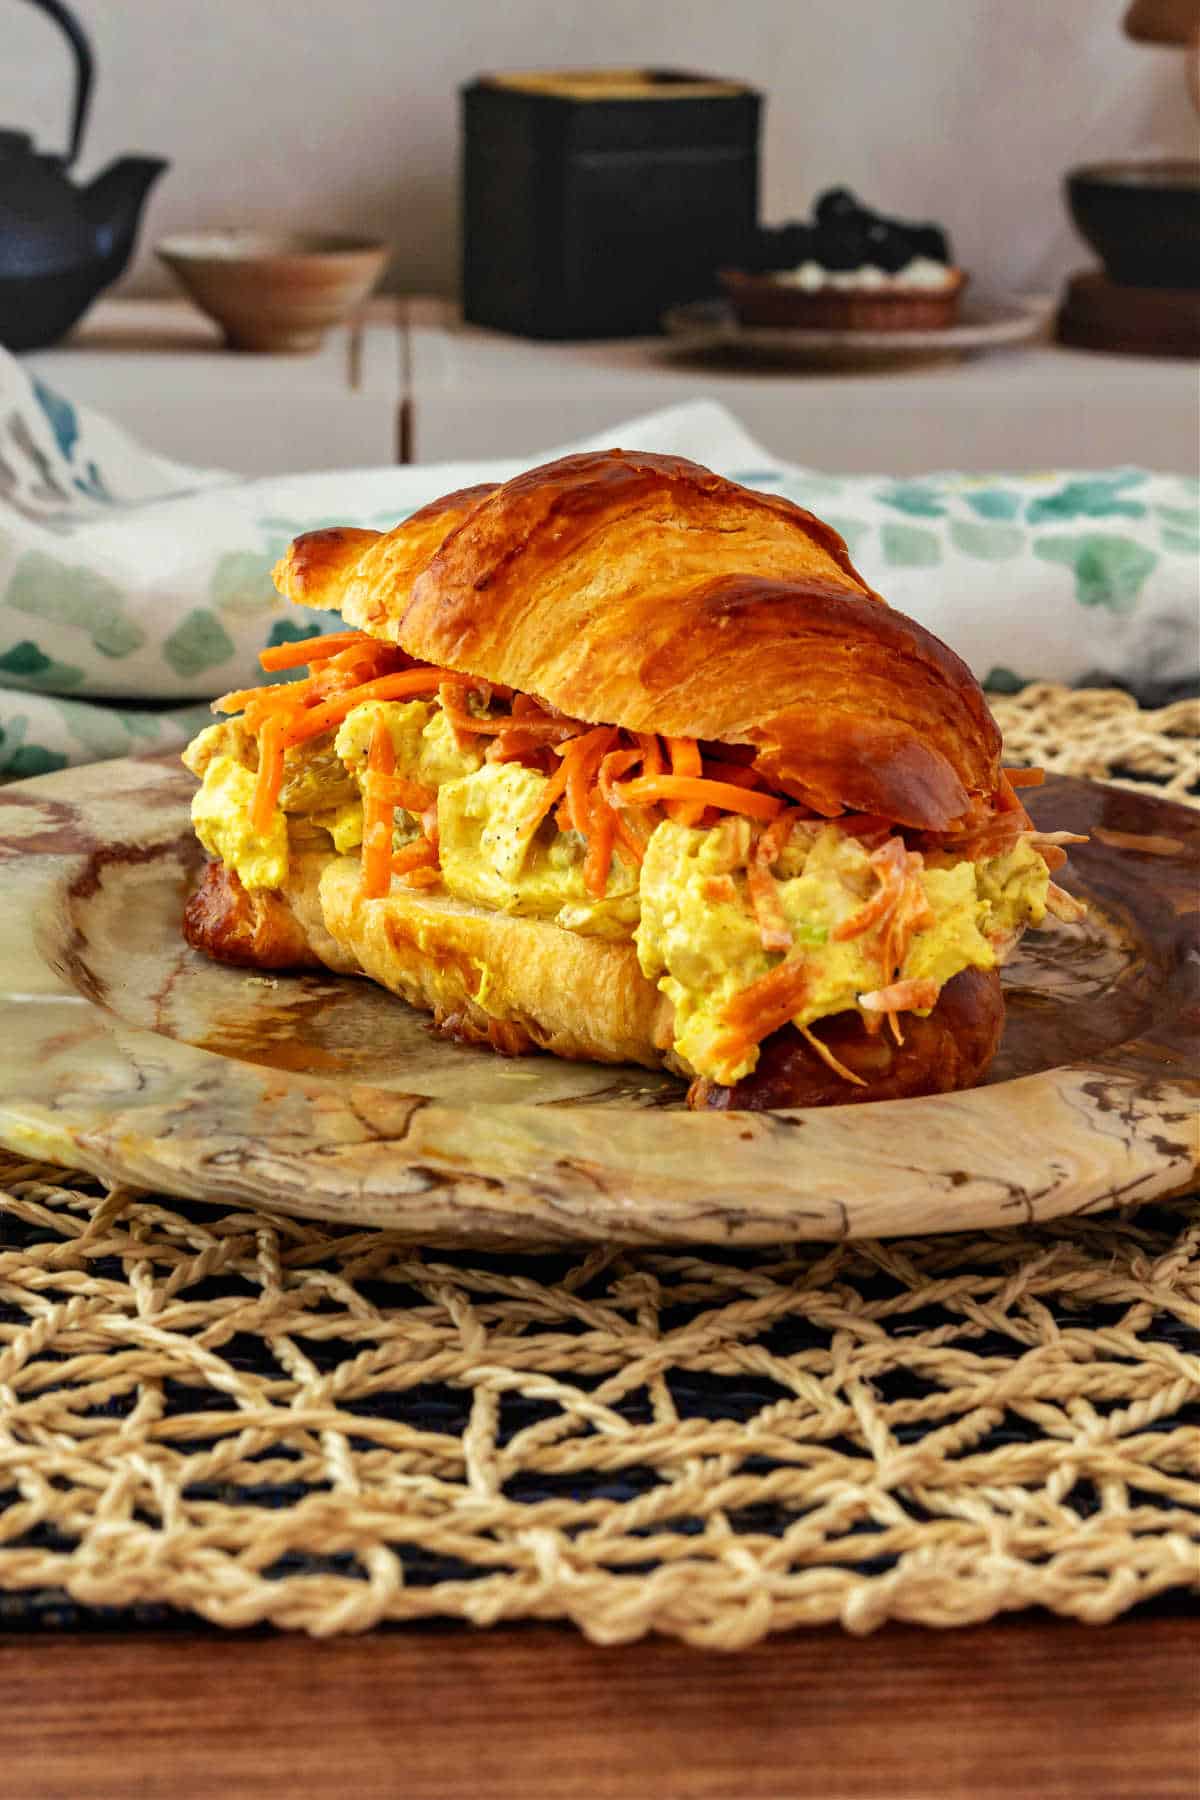 A chicken salad sandwich with shredded carrots made on a split croissant and on an earth-toned plate.